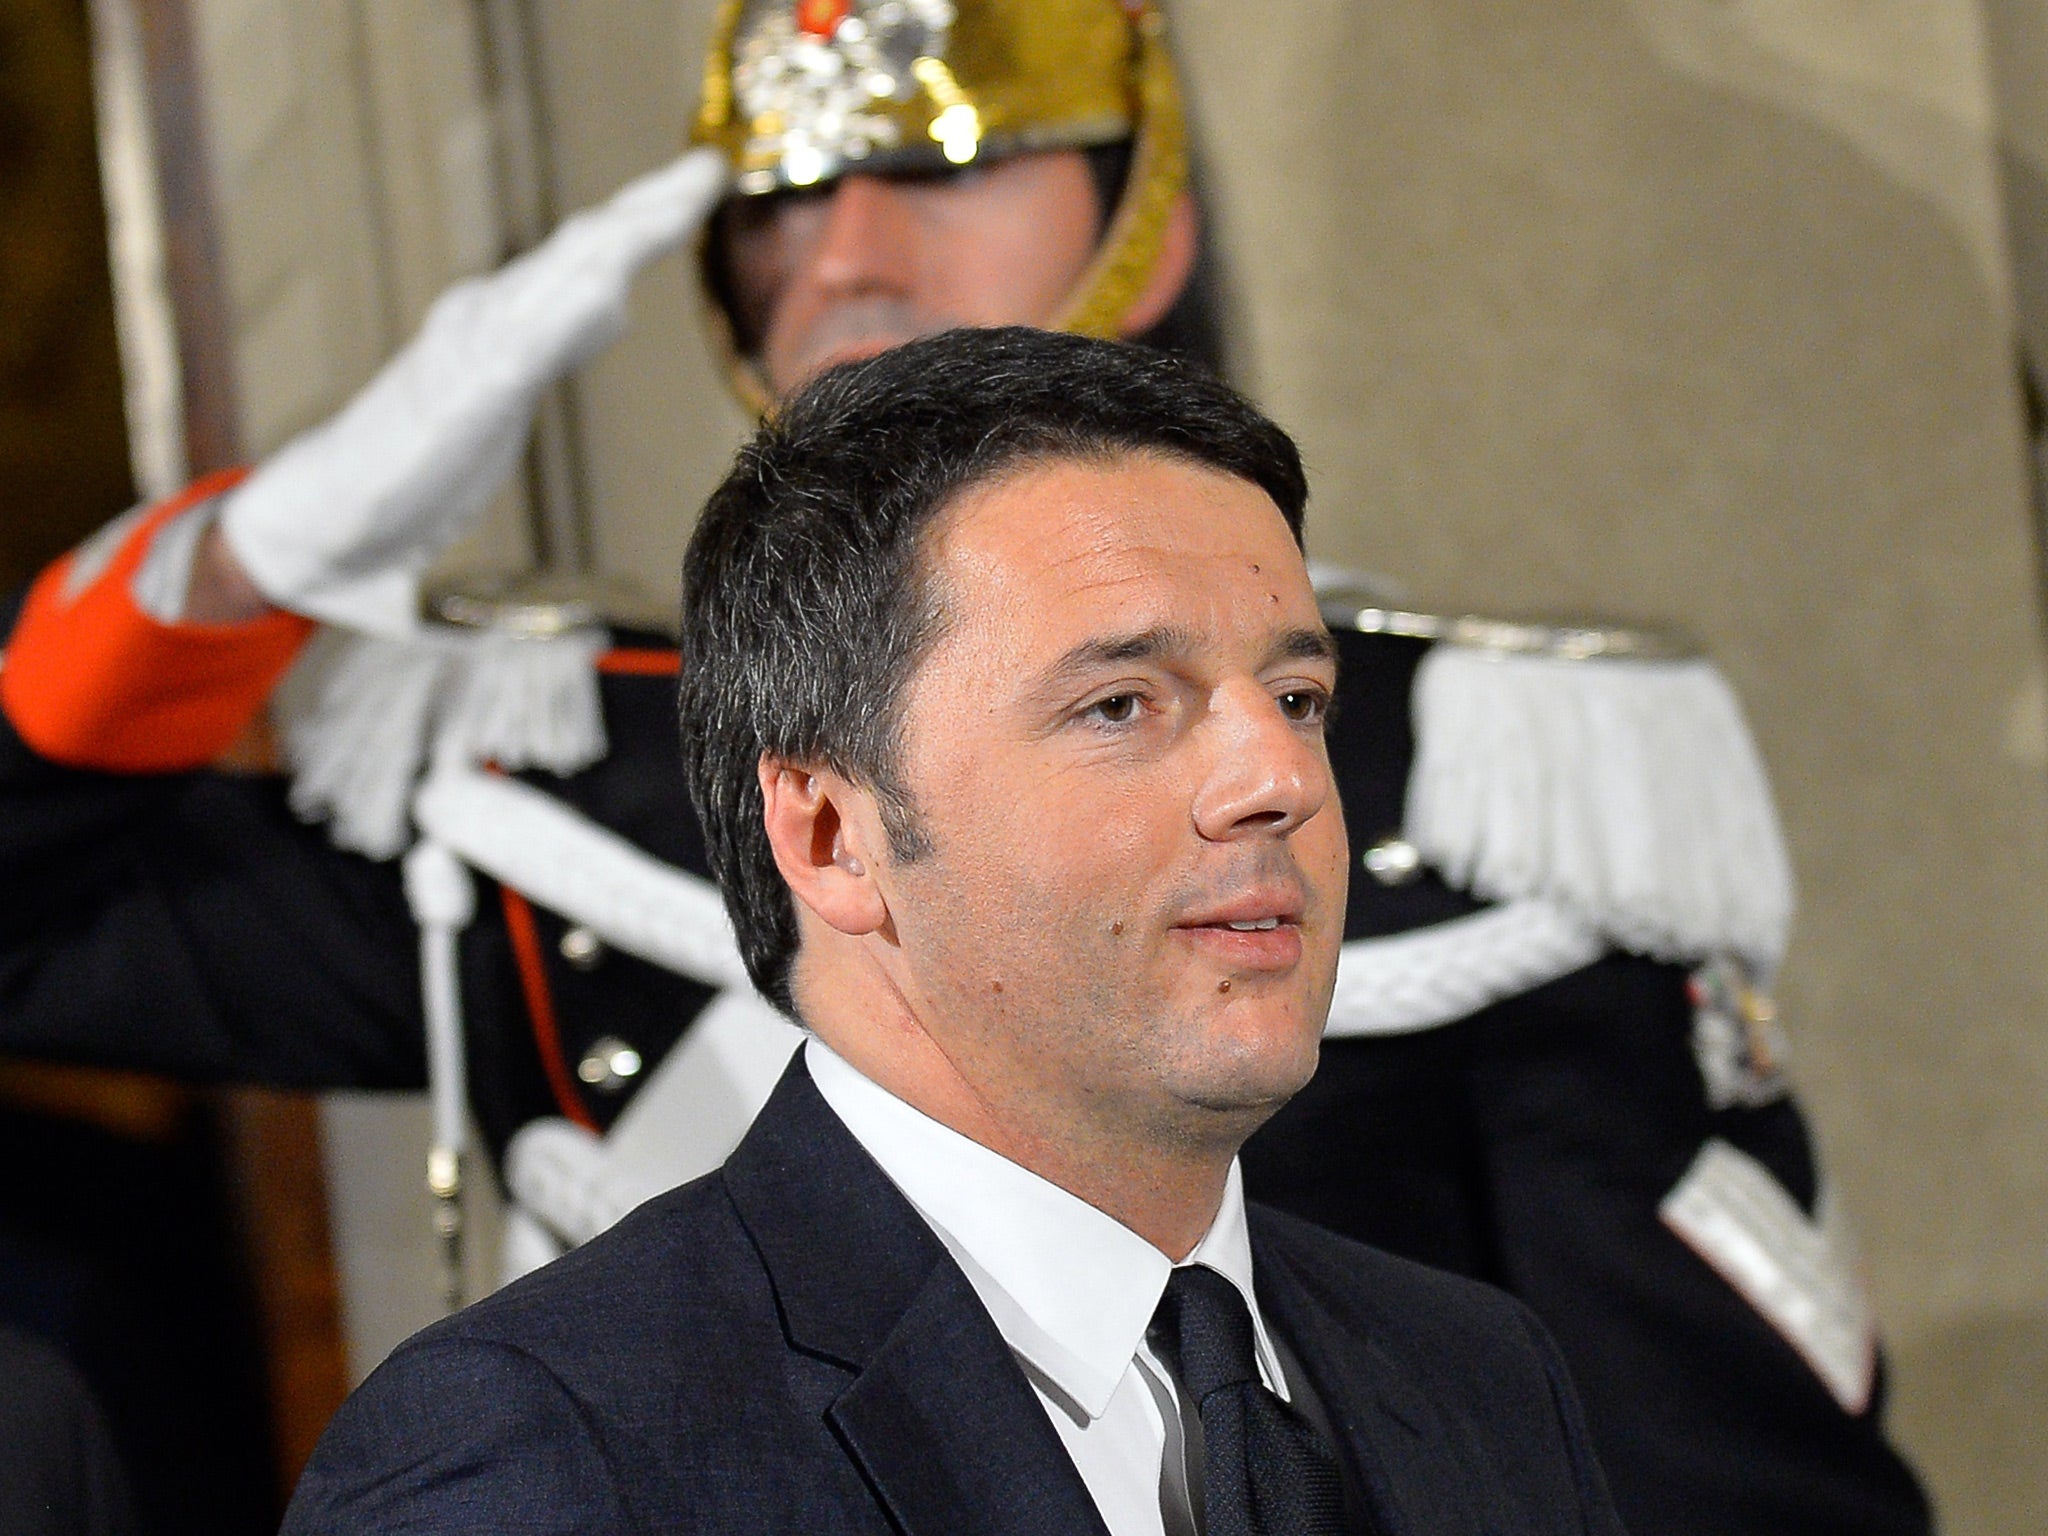 The new prime minister has laid out an ambitious agenda for his first months in office, promising a sweeping overhaul of the electoral and constitutional system to give Italy more stable governments in future